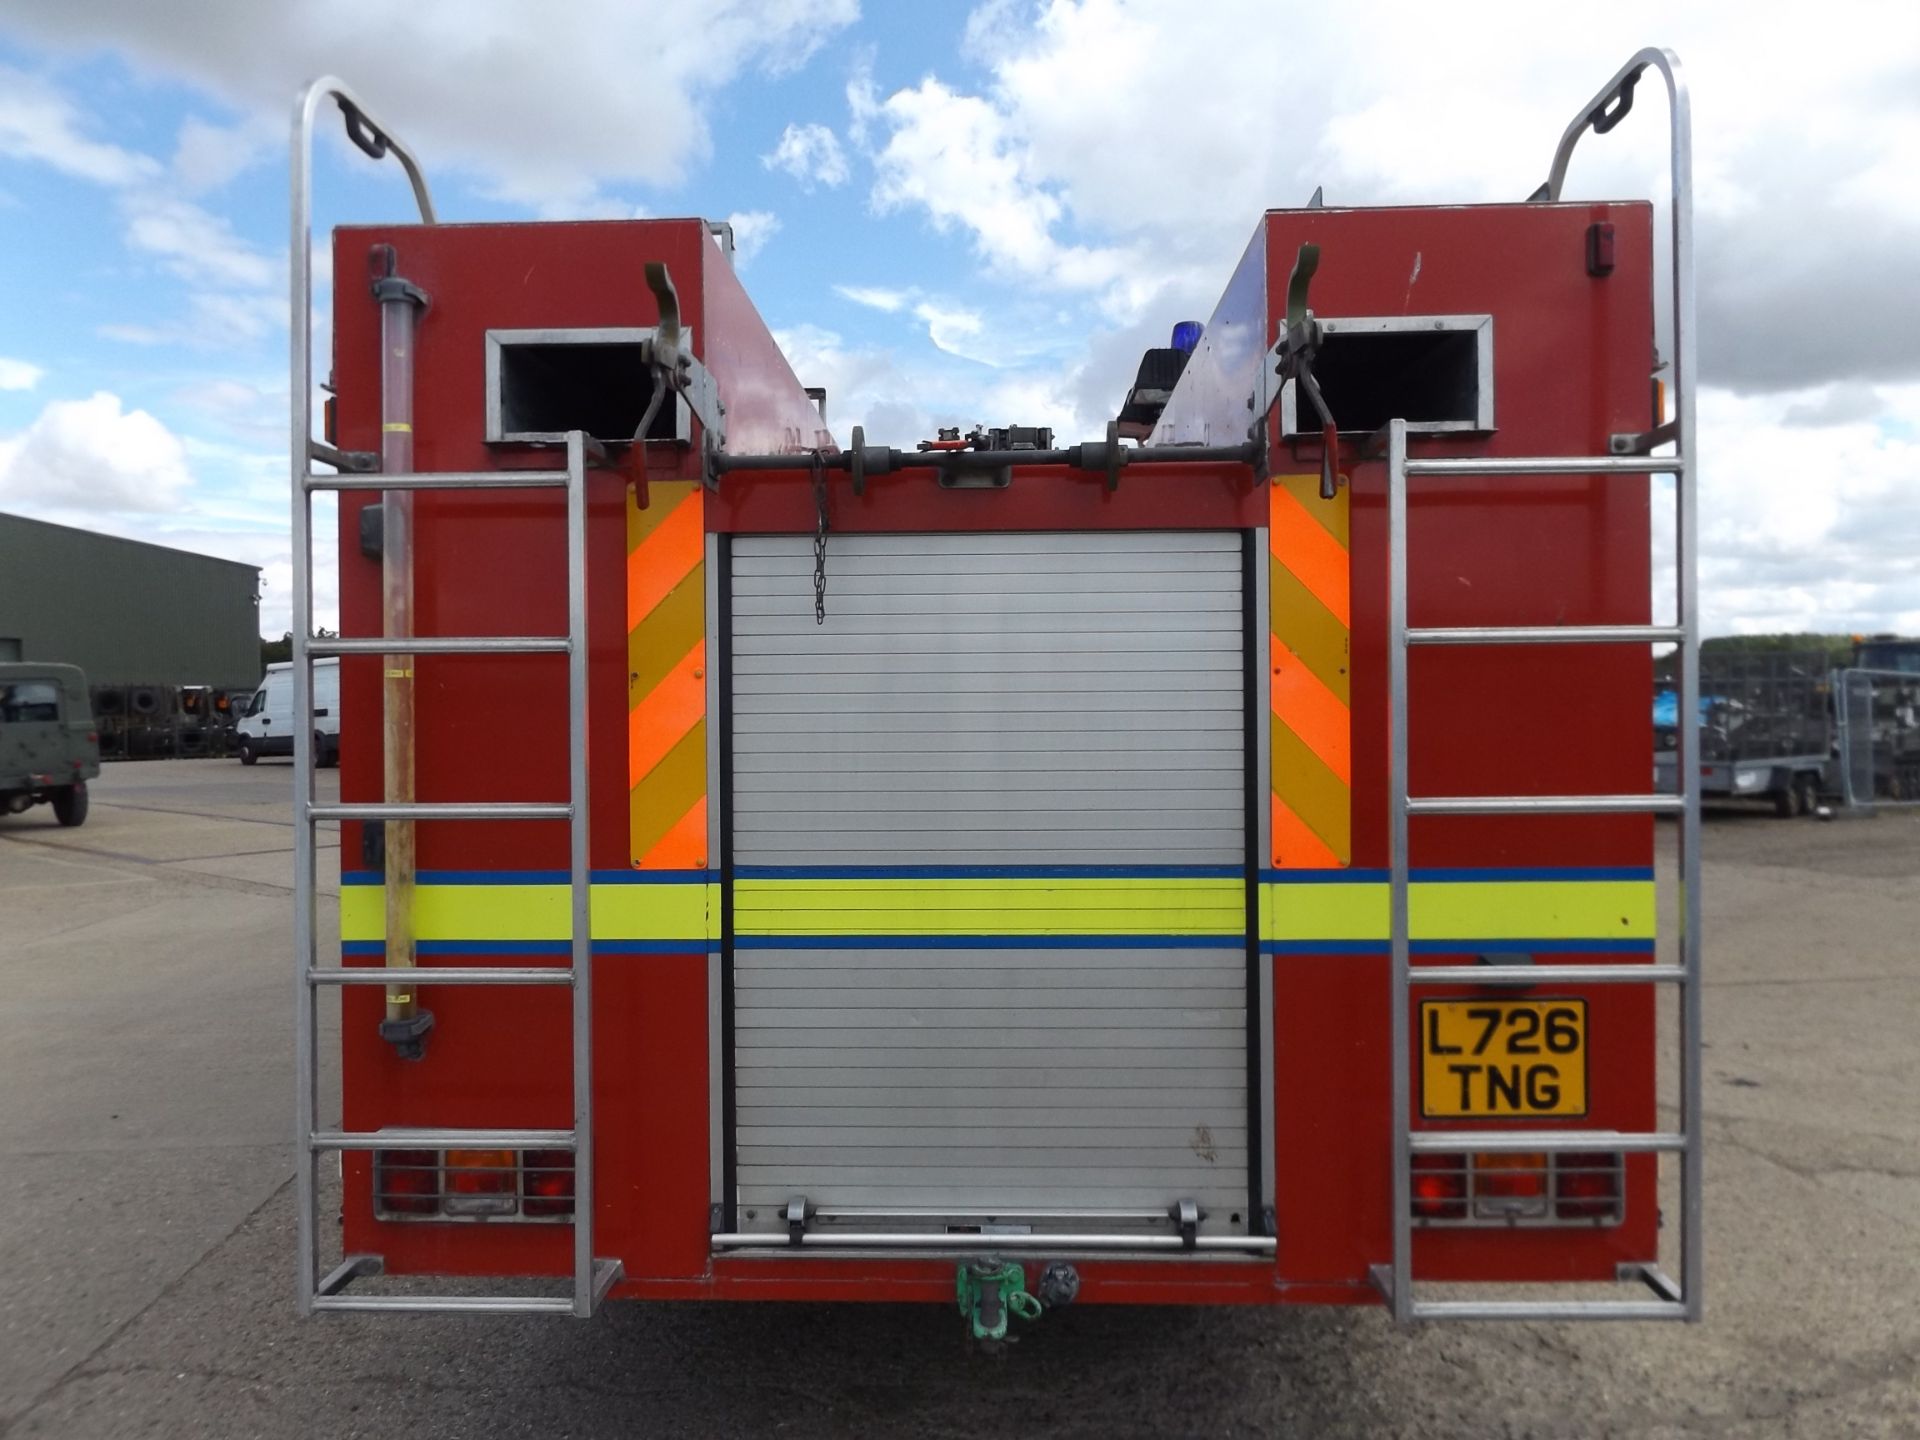 Mercedes 1124 Fire Engine - Image 6 of 16